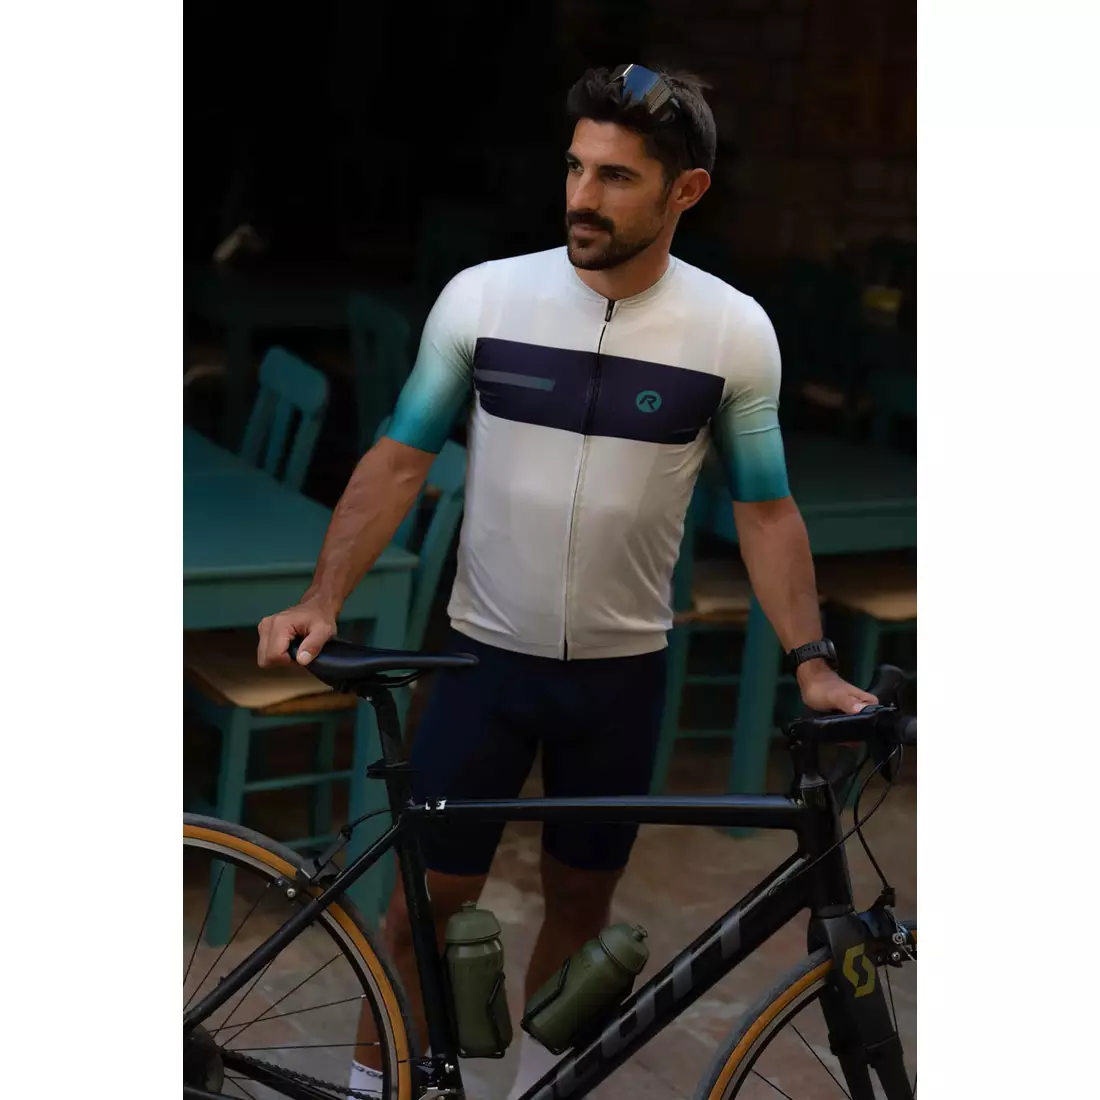 Rogelli DAWN men's cycling jersey, beige and turquoise